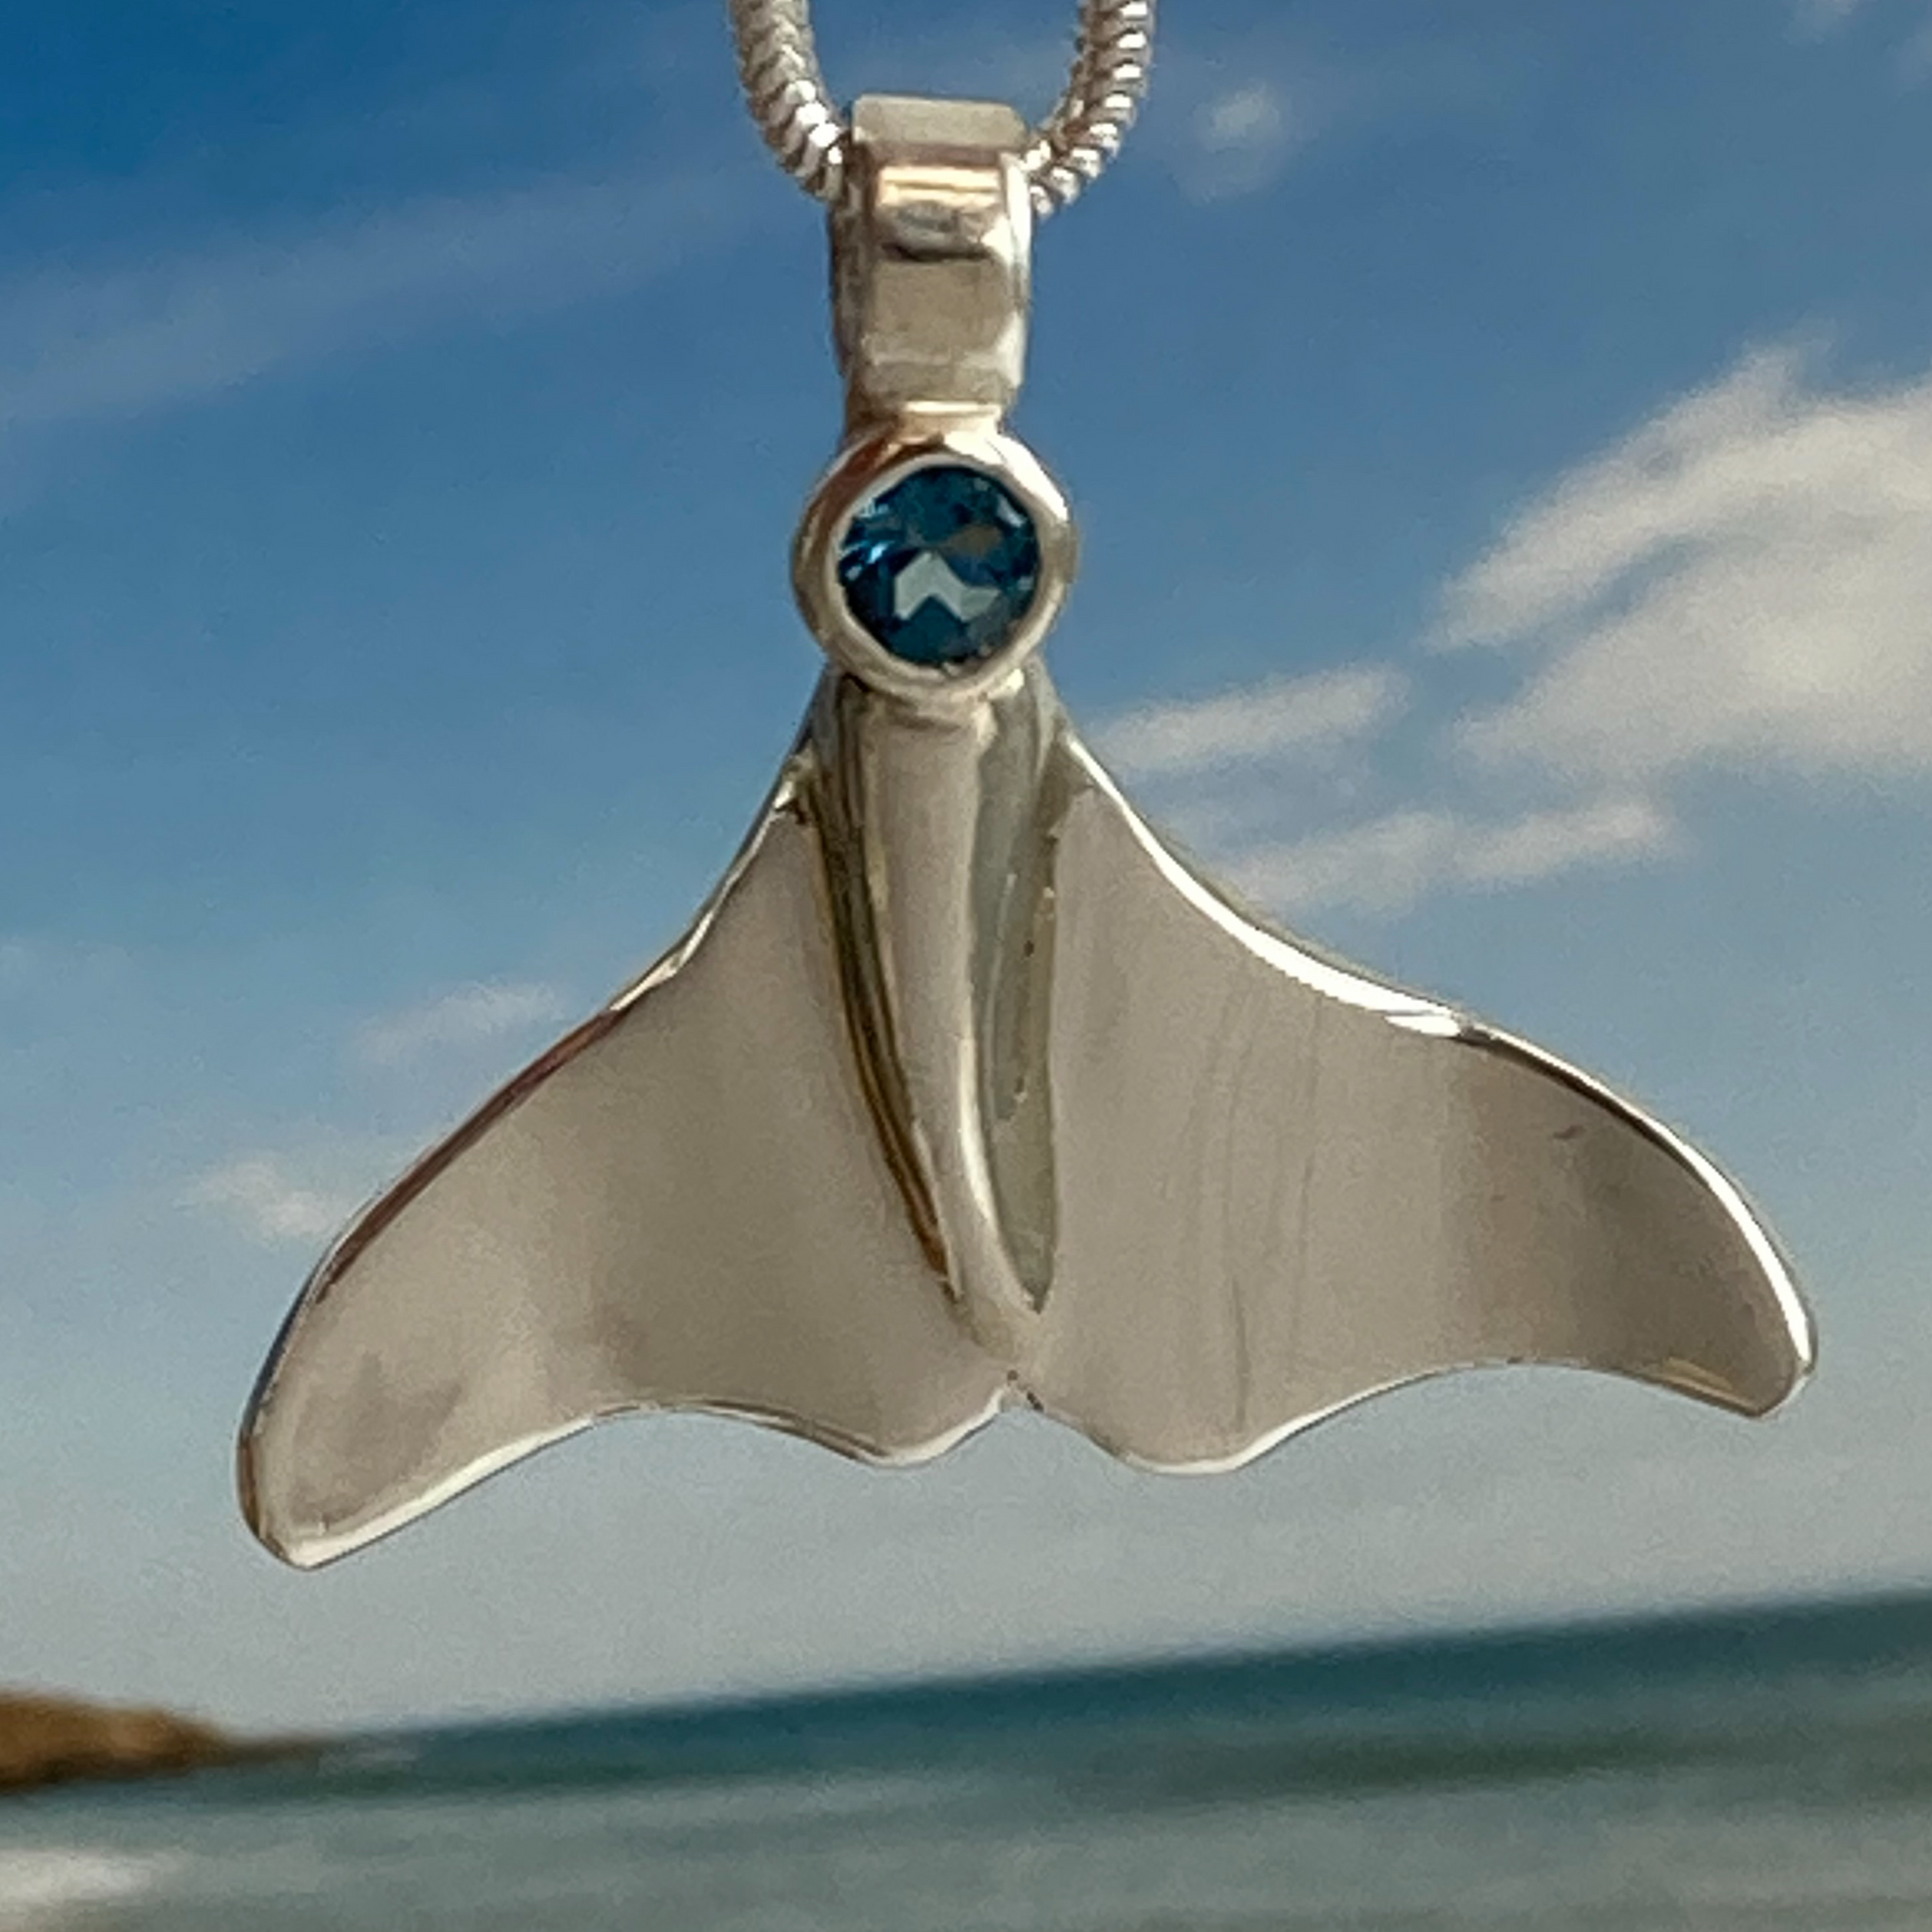 Whale tail necklace with gemstone